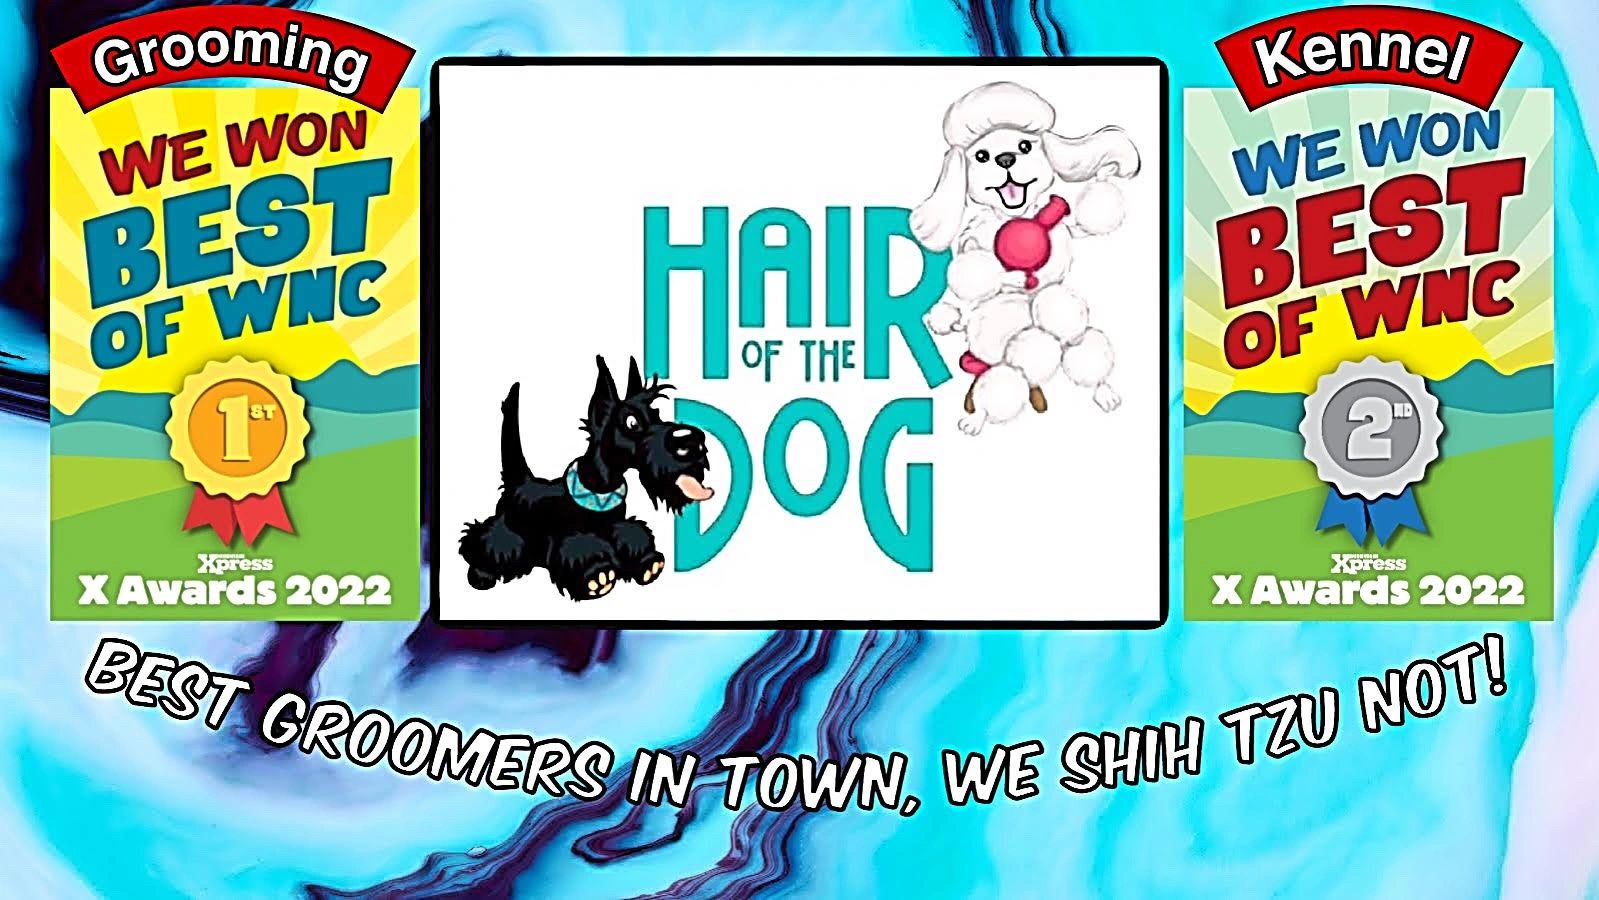 Hair of The Dog - Cage Free, Pet Grooming, Pet Services